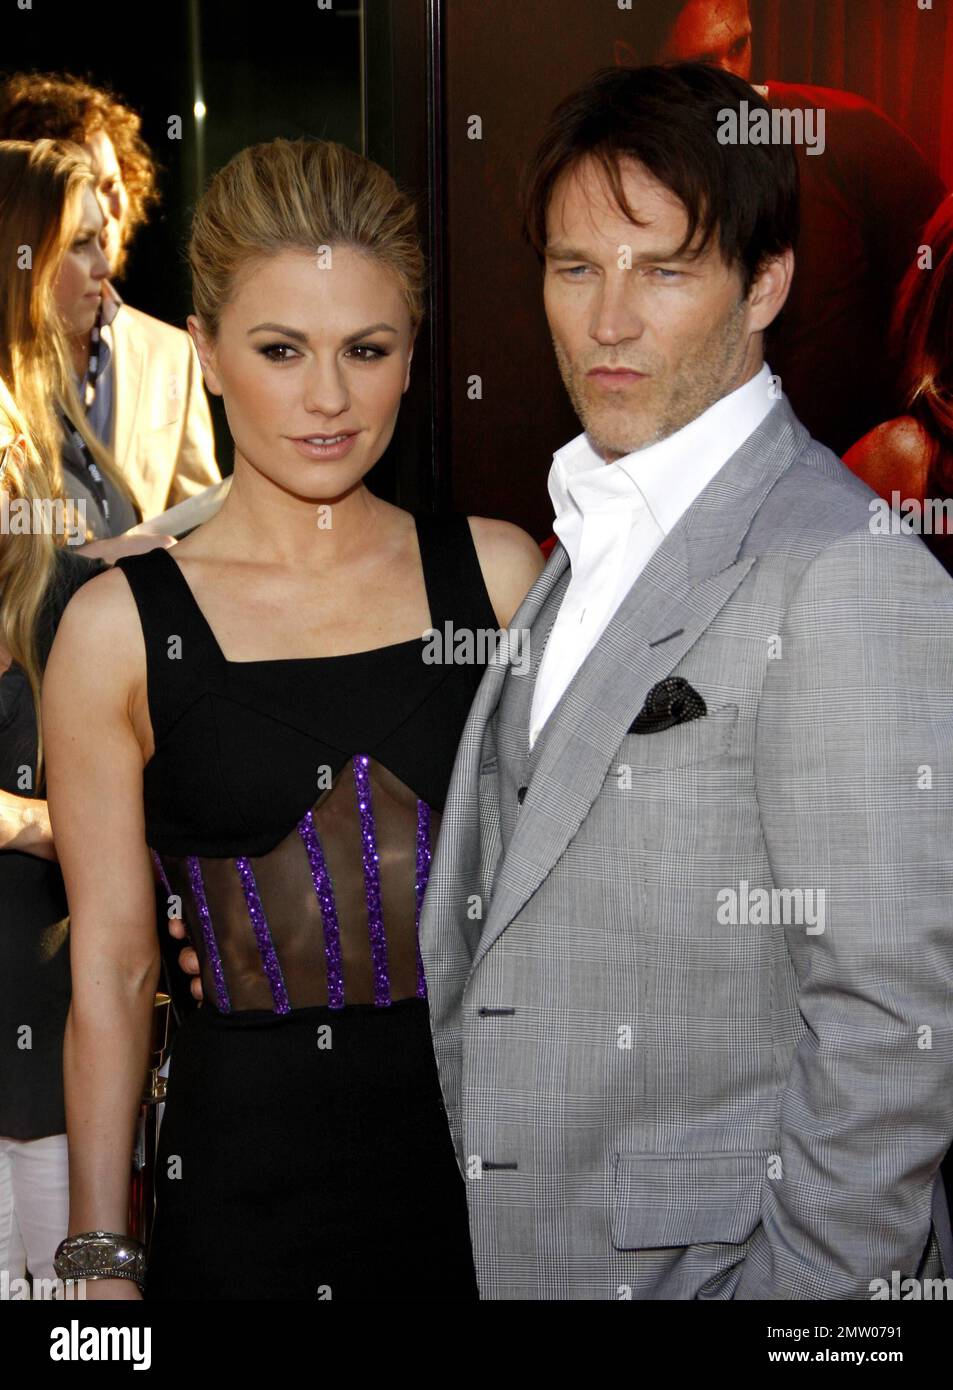 Anna Paquin and Steven Moyer pose at the HBO's Season 4 Premiere of 'True Blood' held at the ArcLight Cinemas in Los Angeles, CA, 06/21/11. Stock Photo